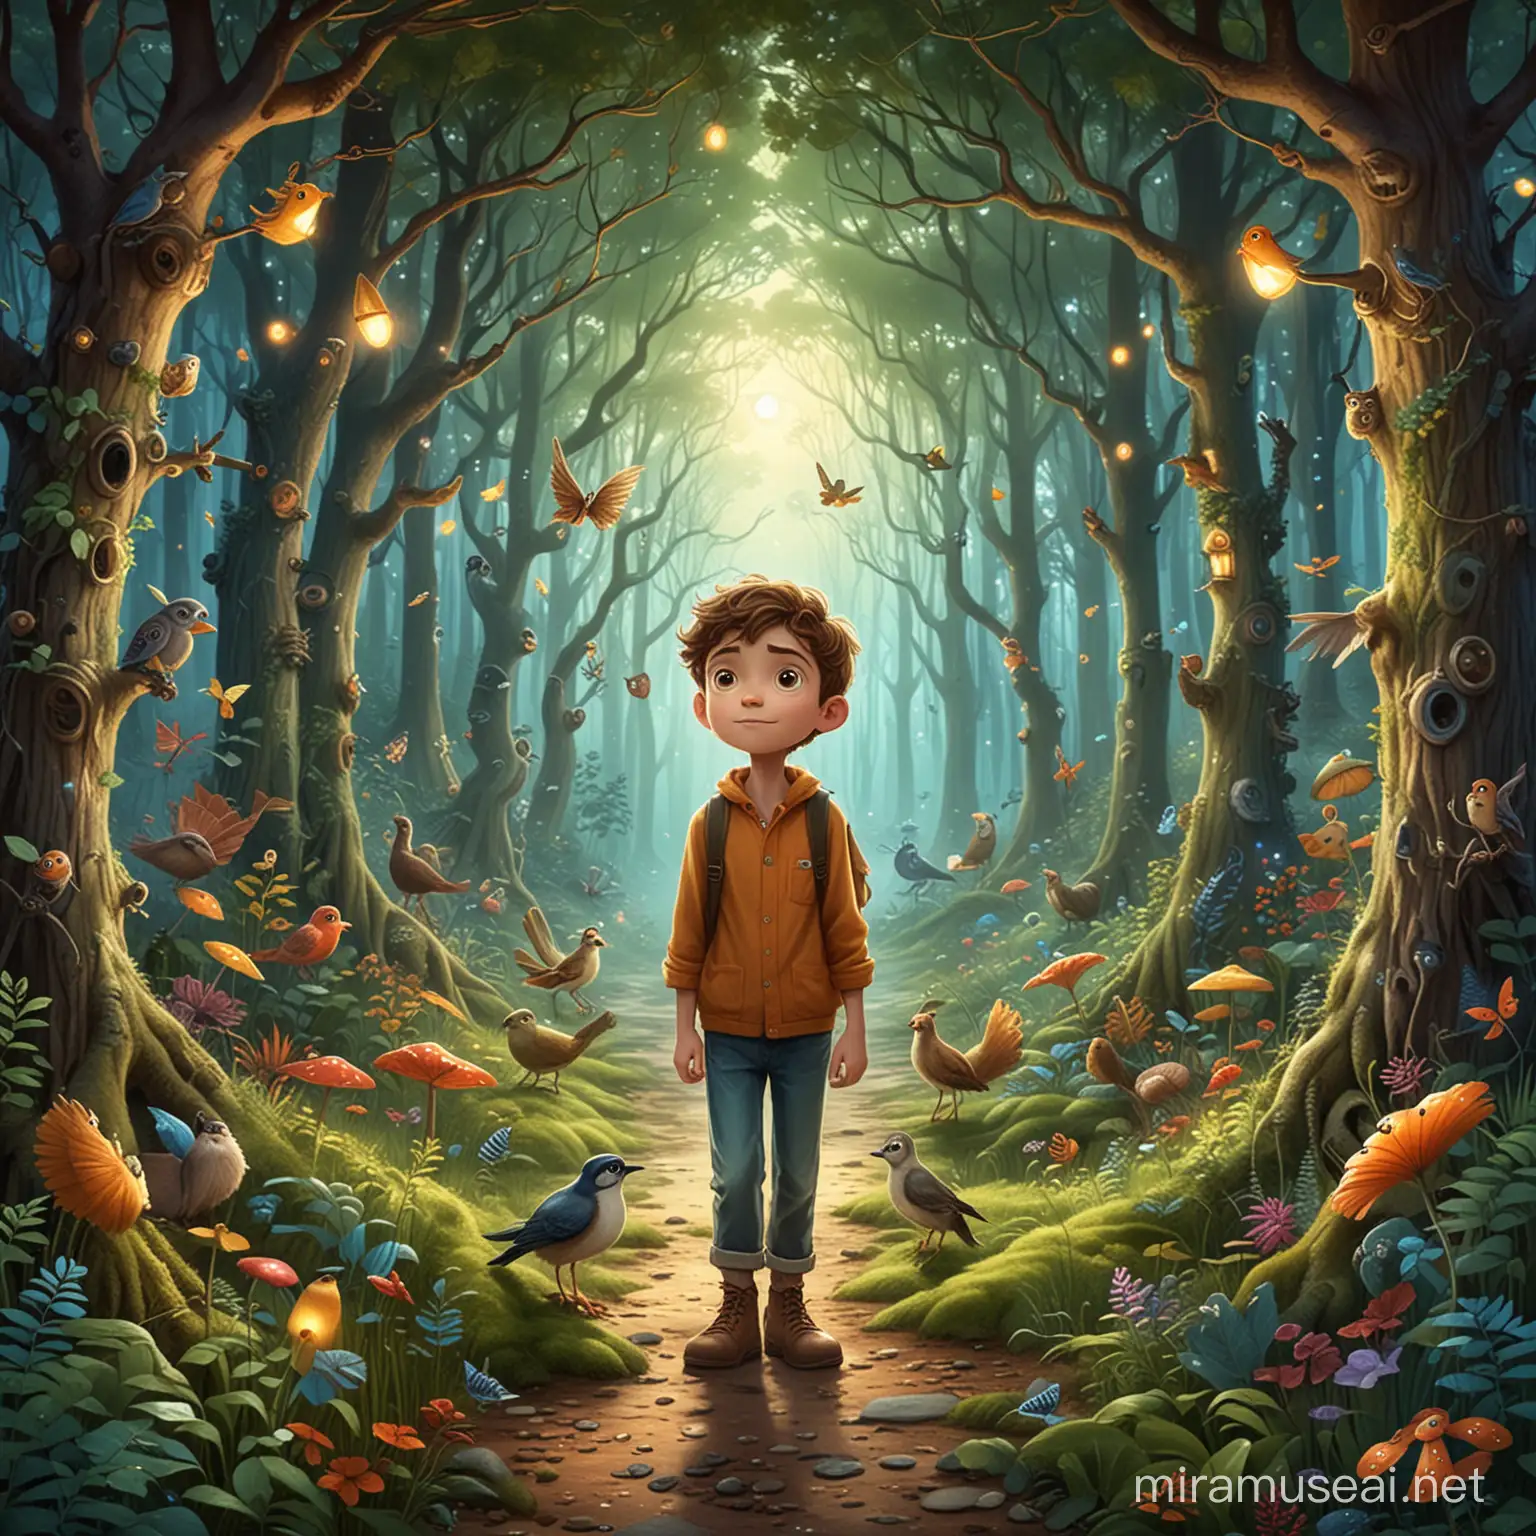 Illustrate a vibrant and enchanting forest with a wide-eyed boy, Leo, at the center, looking curiously into the depths. Surround him with a variety of whimsical forest creatures and a mysterious, inviting path that leads into the heart of the forest. The sky should hint at magic with sparkling lights and a majestic bird flying overhead, symbolizing the adventure and leadership theme of the story.